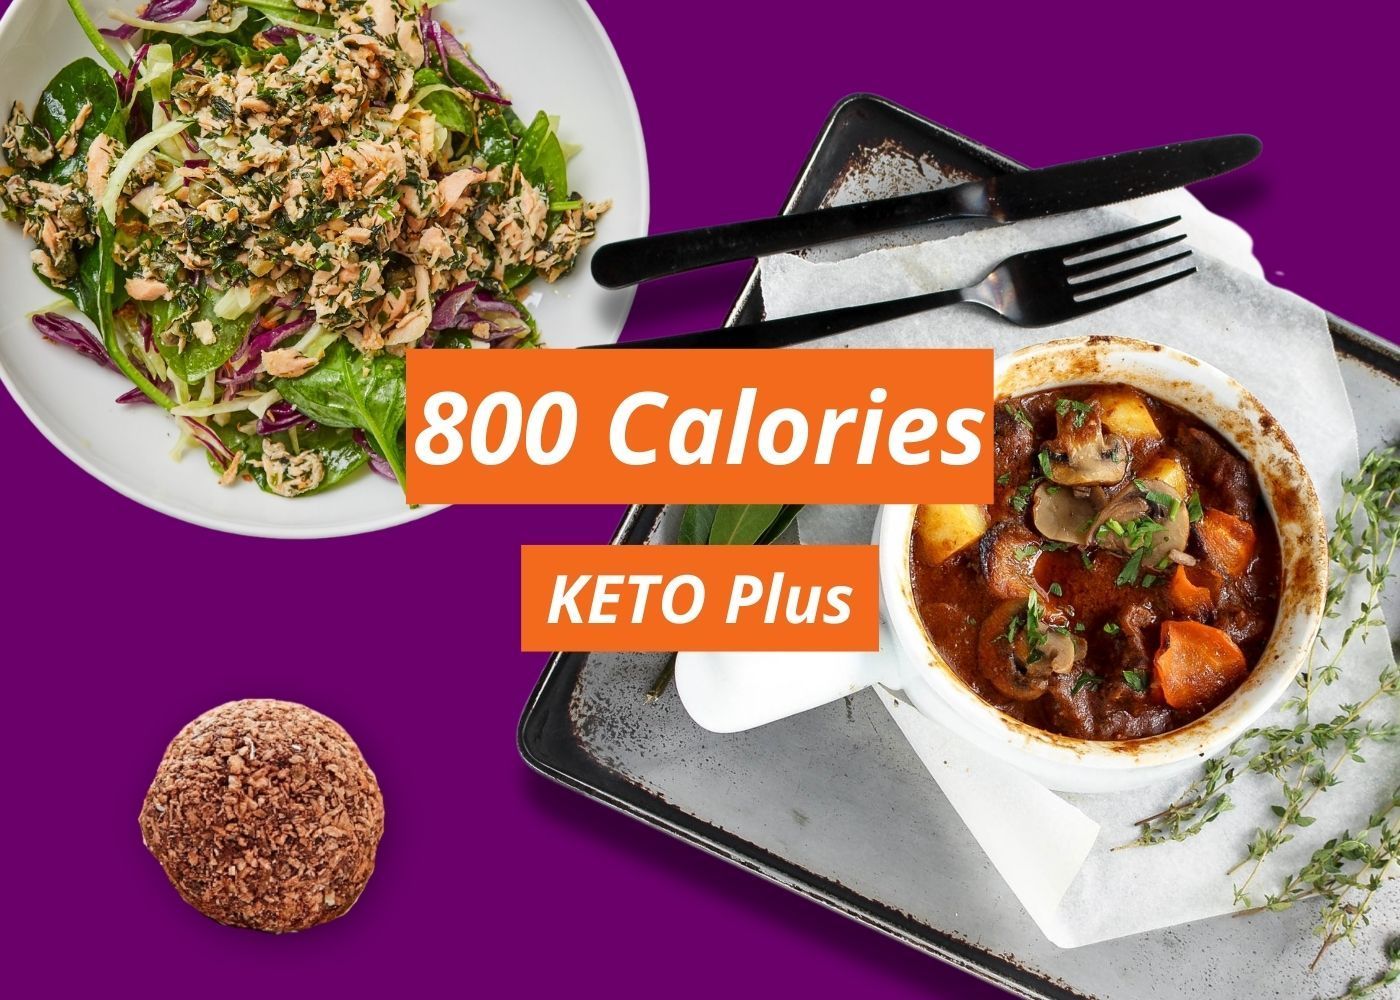 800 Calorie Keto - 7 Day - Plan 2 - with Salad Greens